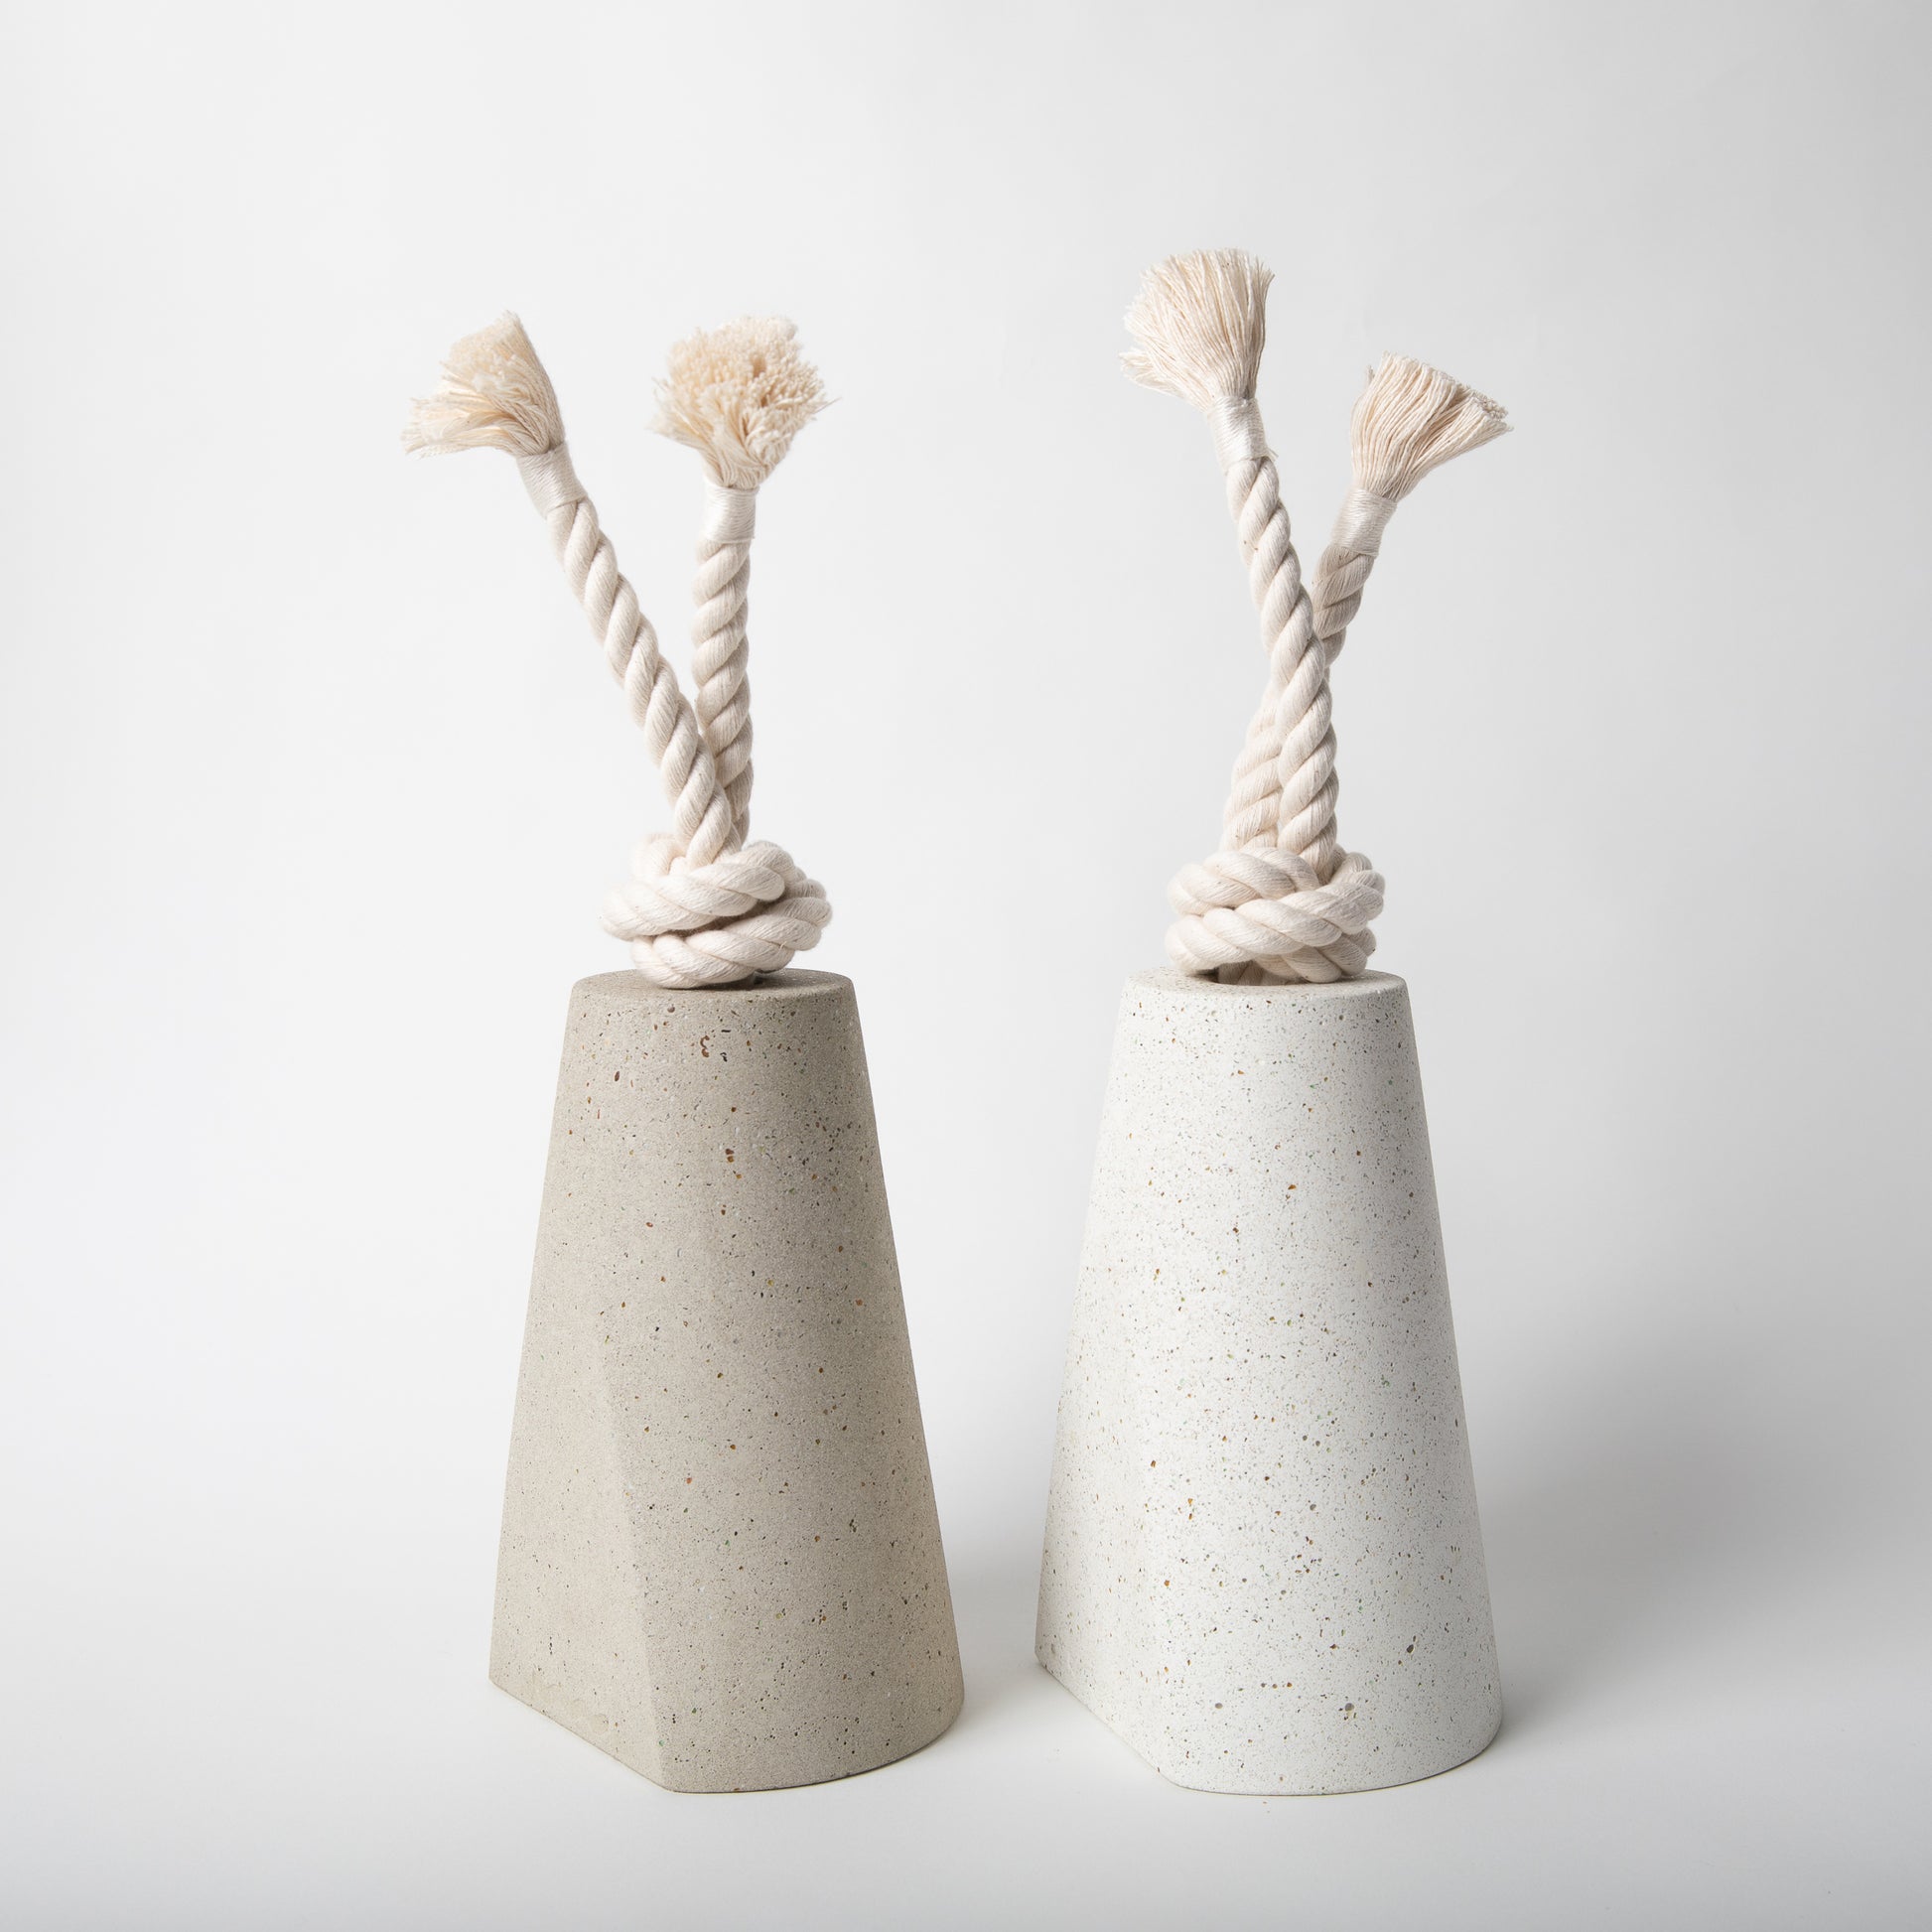 Concrete terrazzo doorstop with cotton rope in both colors side by side.